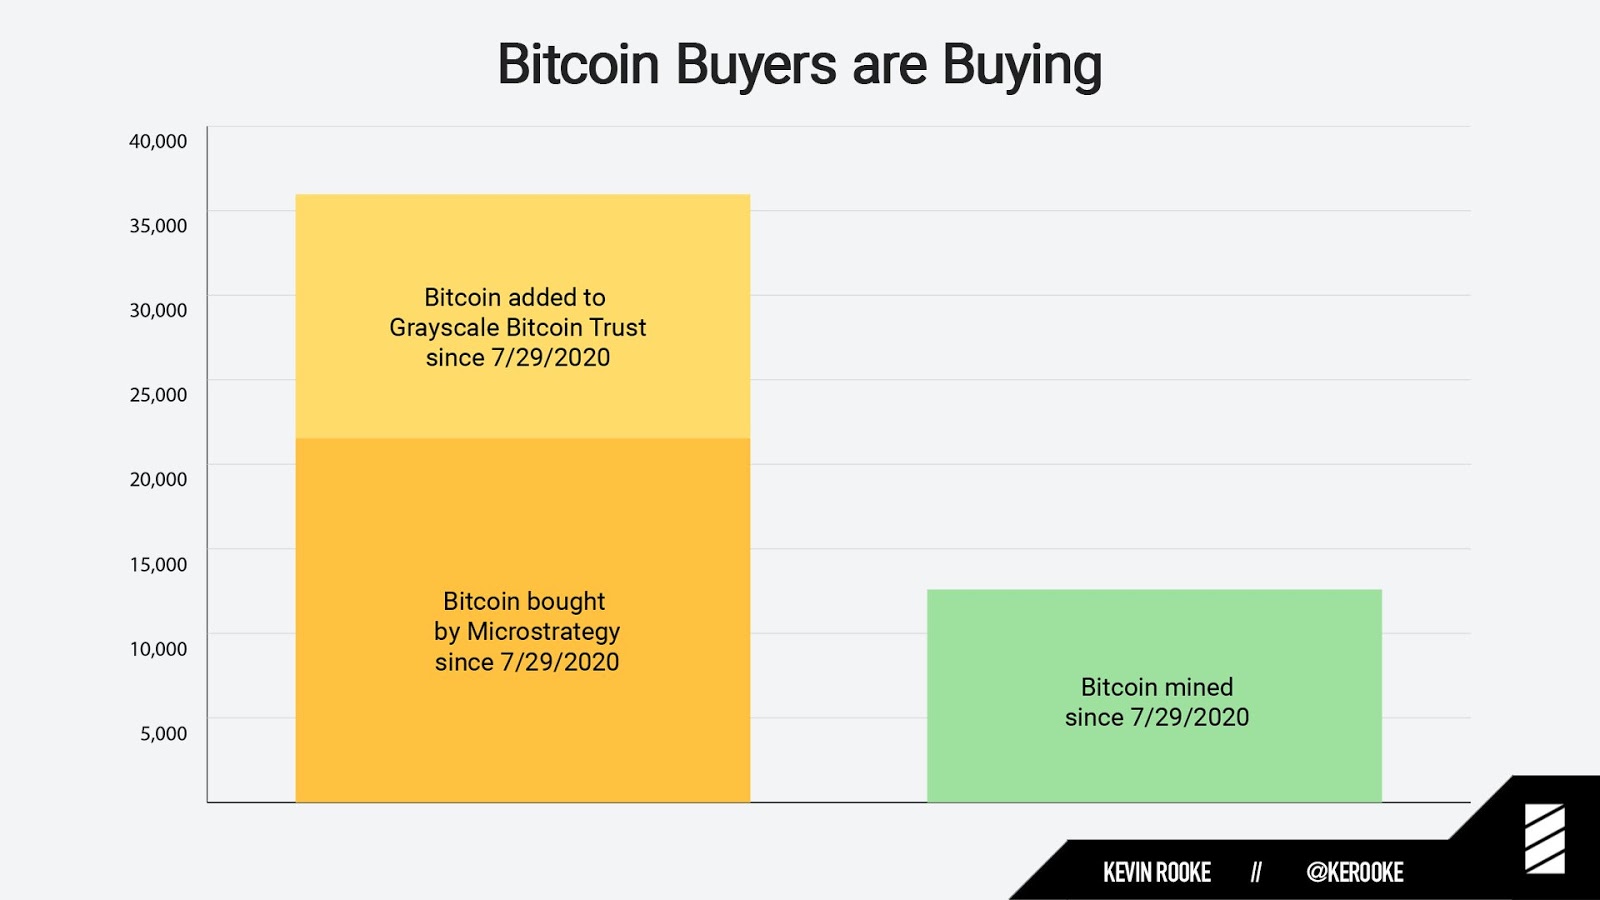 Bitcoin buying from Grayscale and MicroStrategy Vs. supply